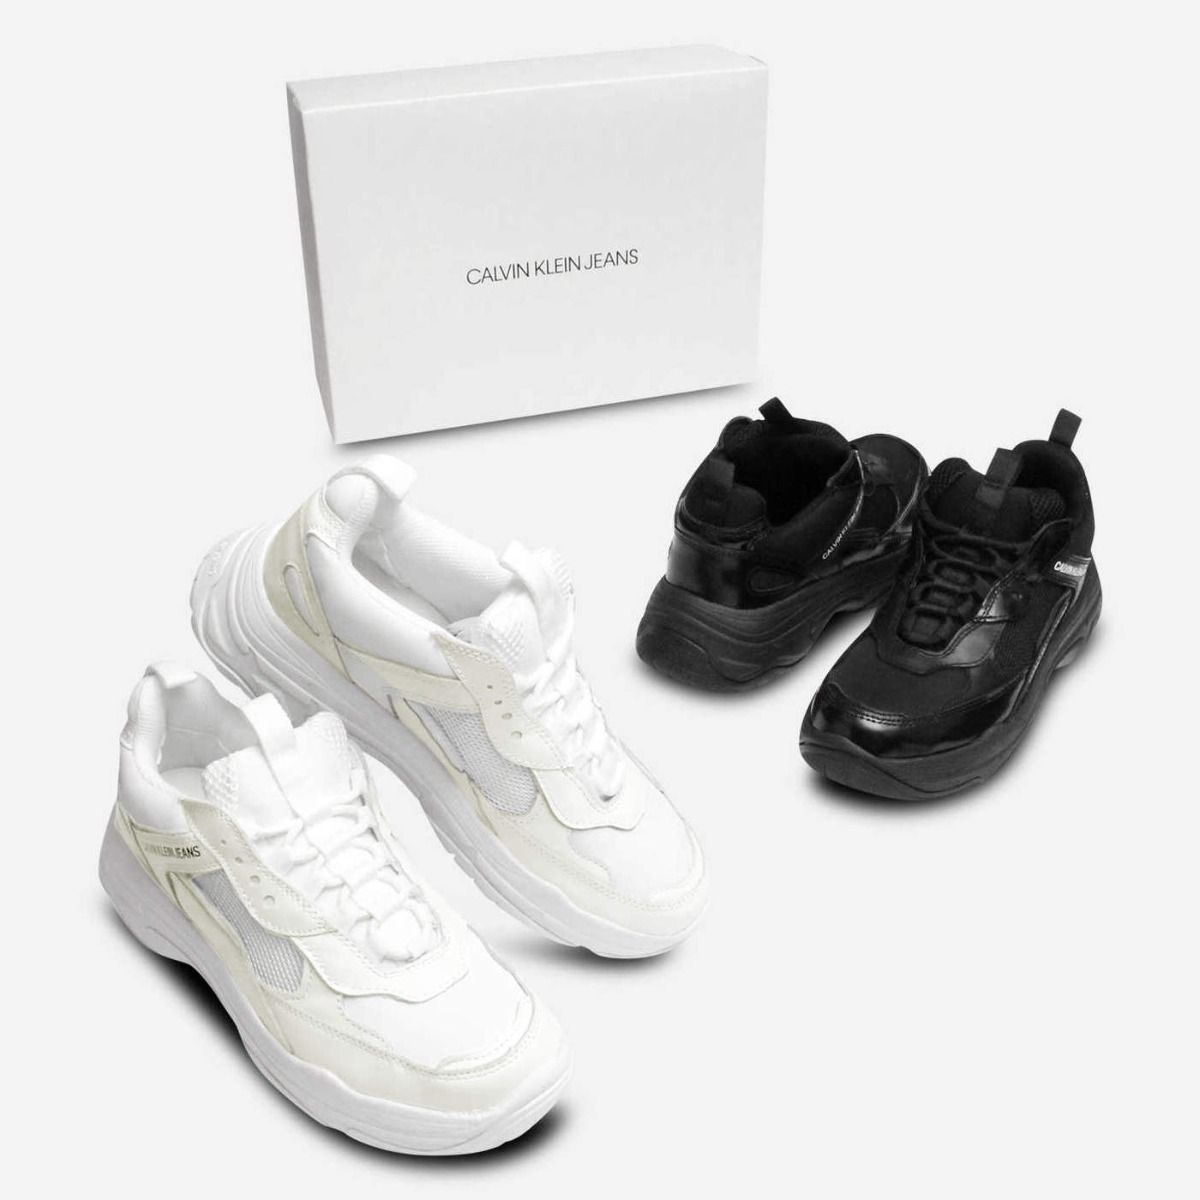 Maya Chunky Trainers in White Leather by Calvin Klein Jeans